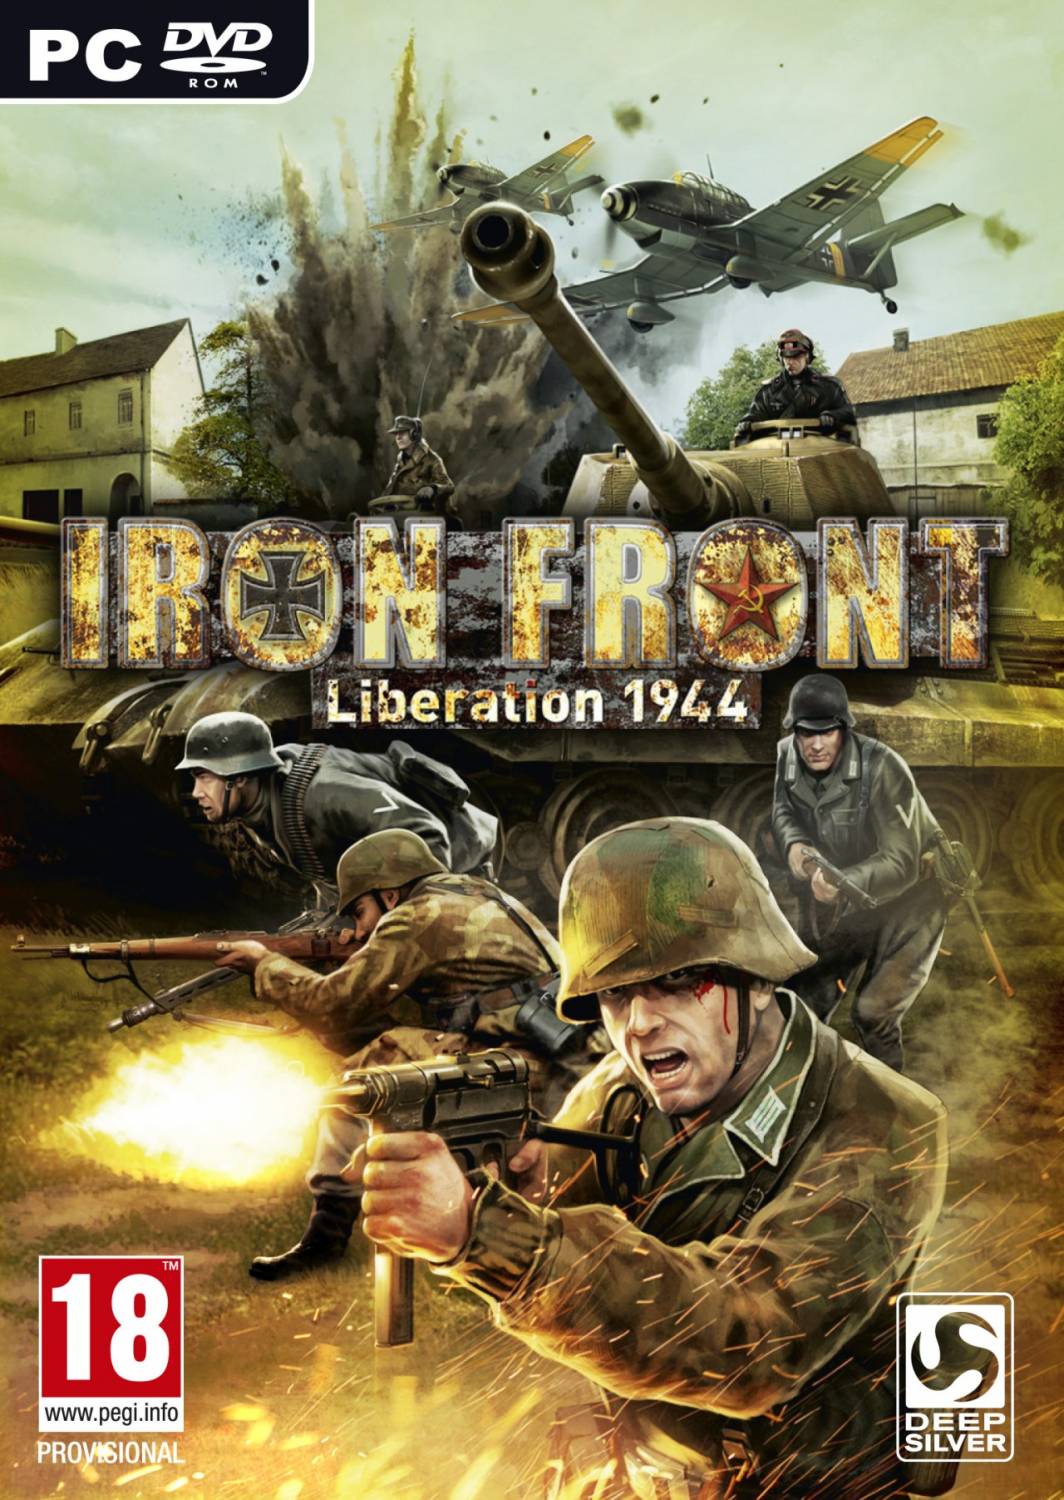 IRON FRONT: LIBERATION 1944 (DEEP SILVER) (ENG) [L] *RELOADED*